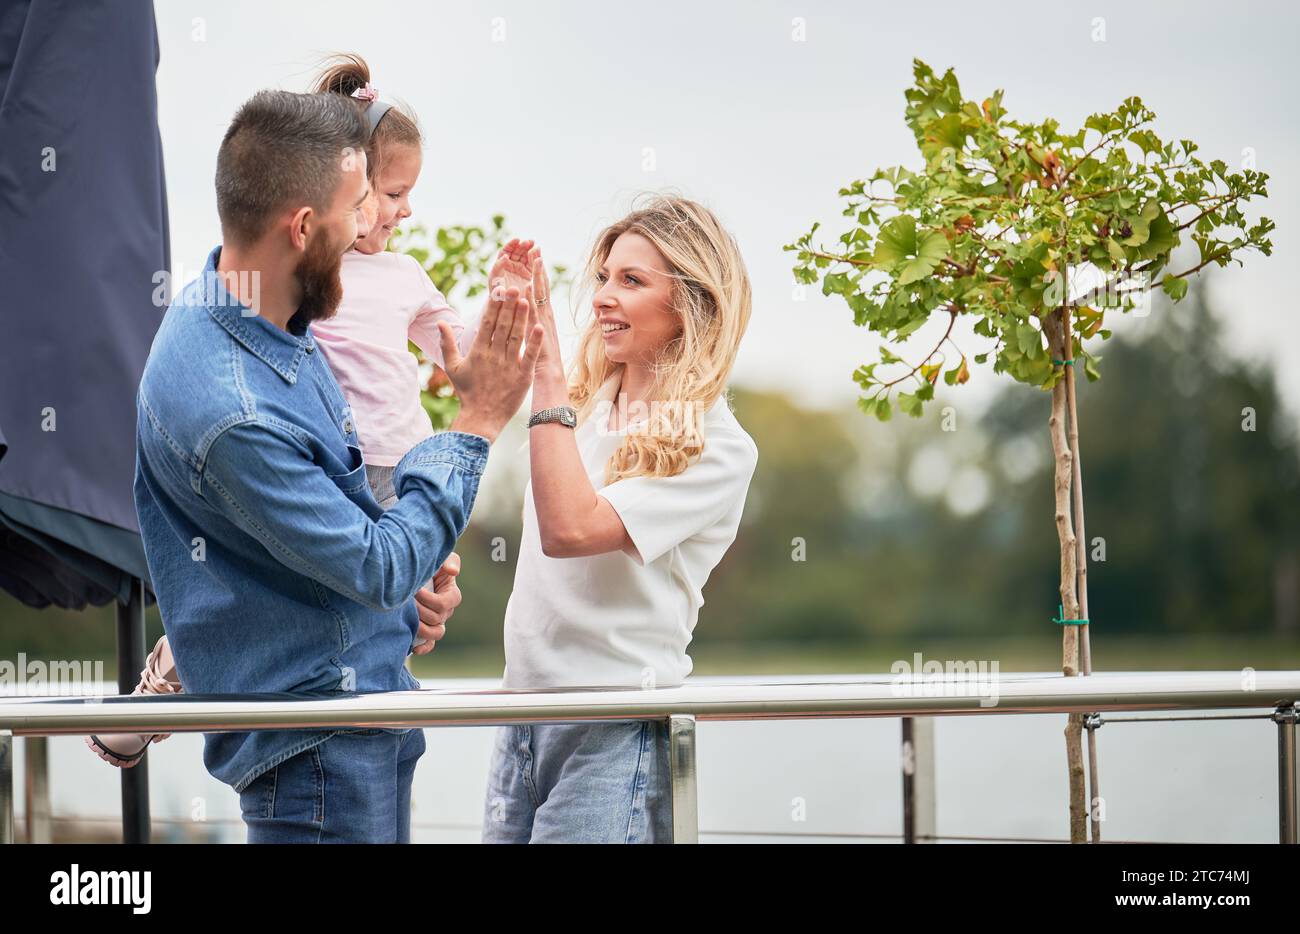 Cheerful woman, man and little girl standing near green tree and slapping hands giving high five outdoors. Happy man holding daughter and smiling while celebrating success with wife and child. Stock Photo